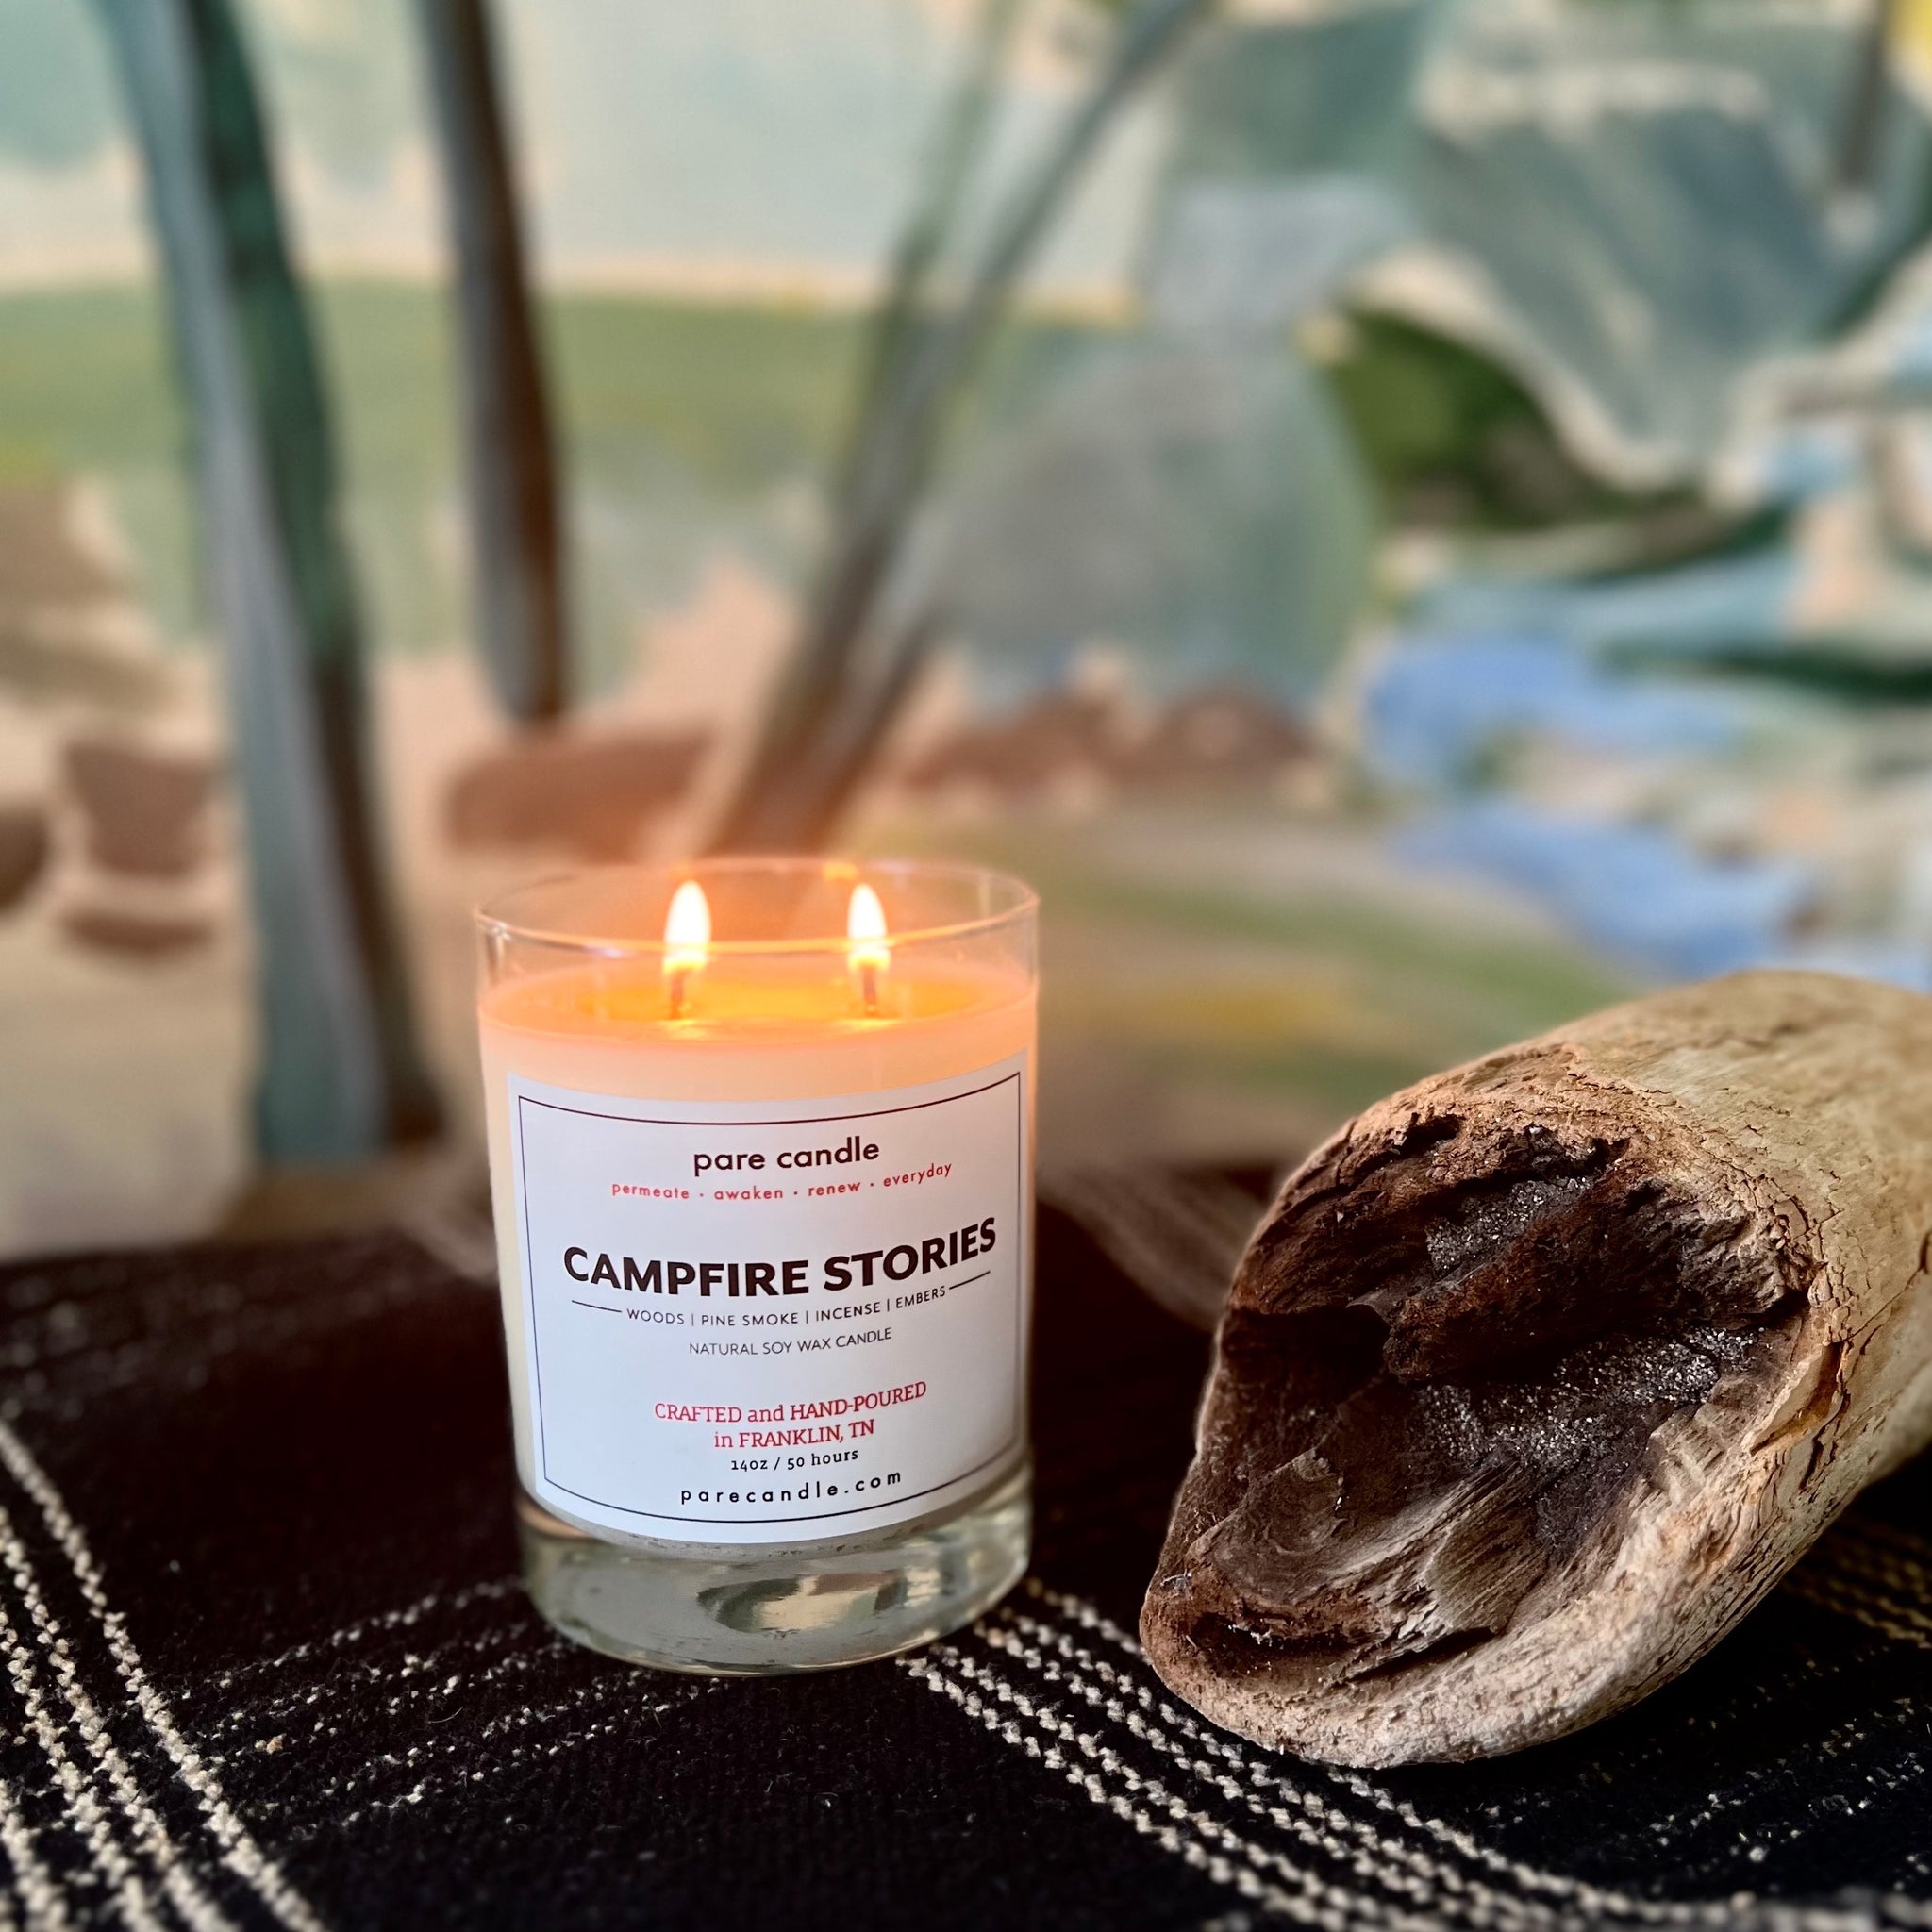 Peppermint Mocha Candle Kit - Nature's Garden Candles